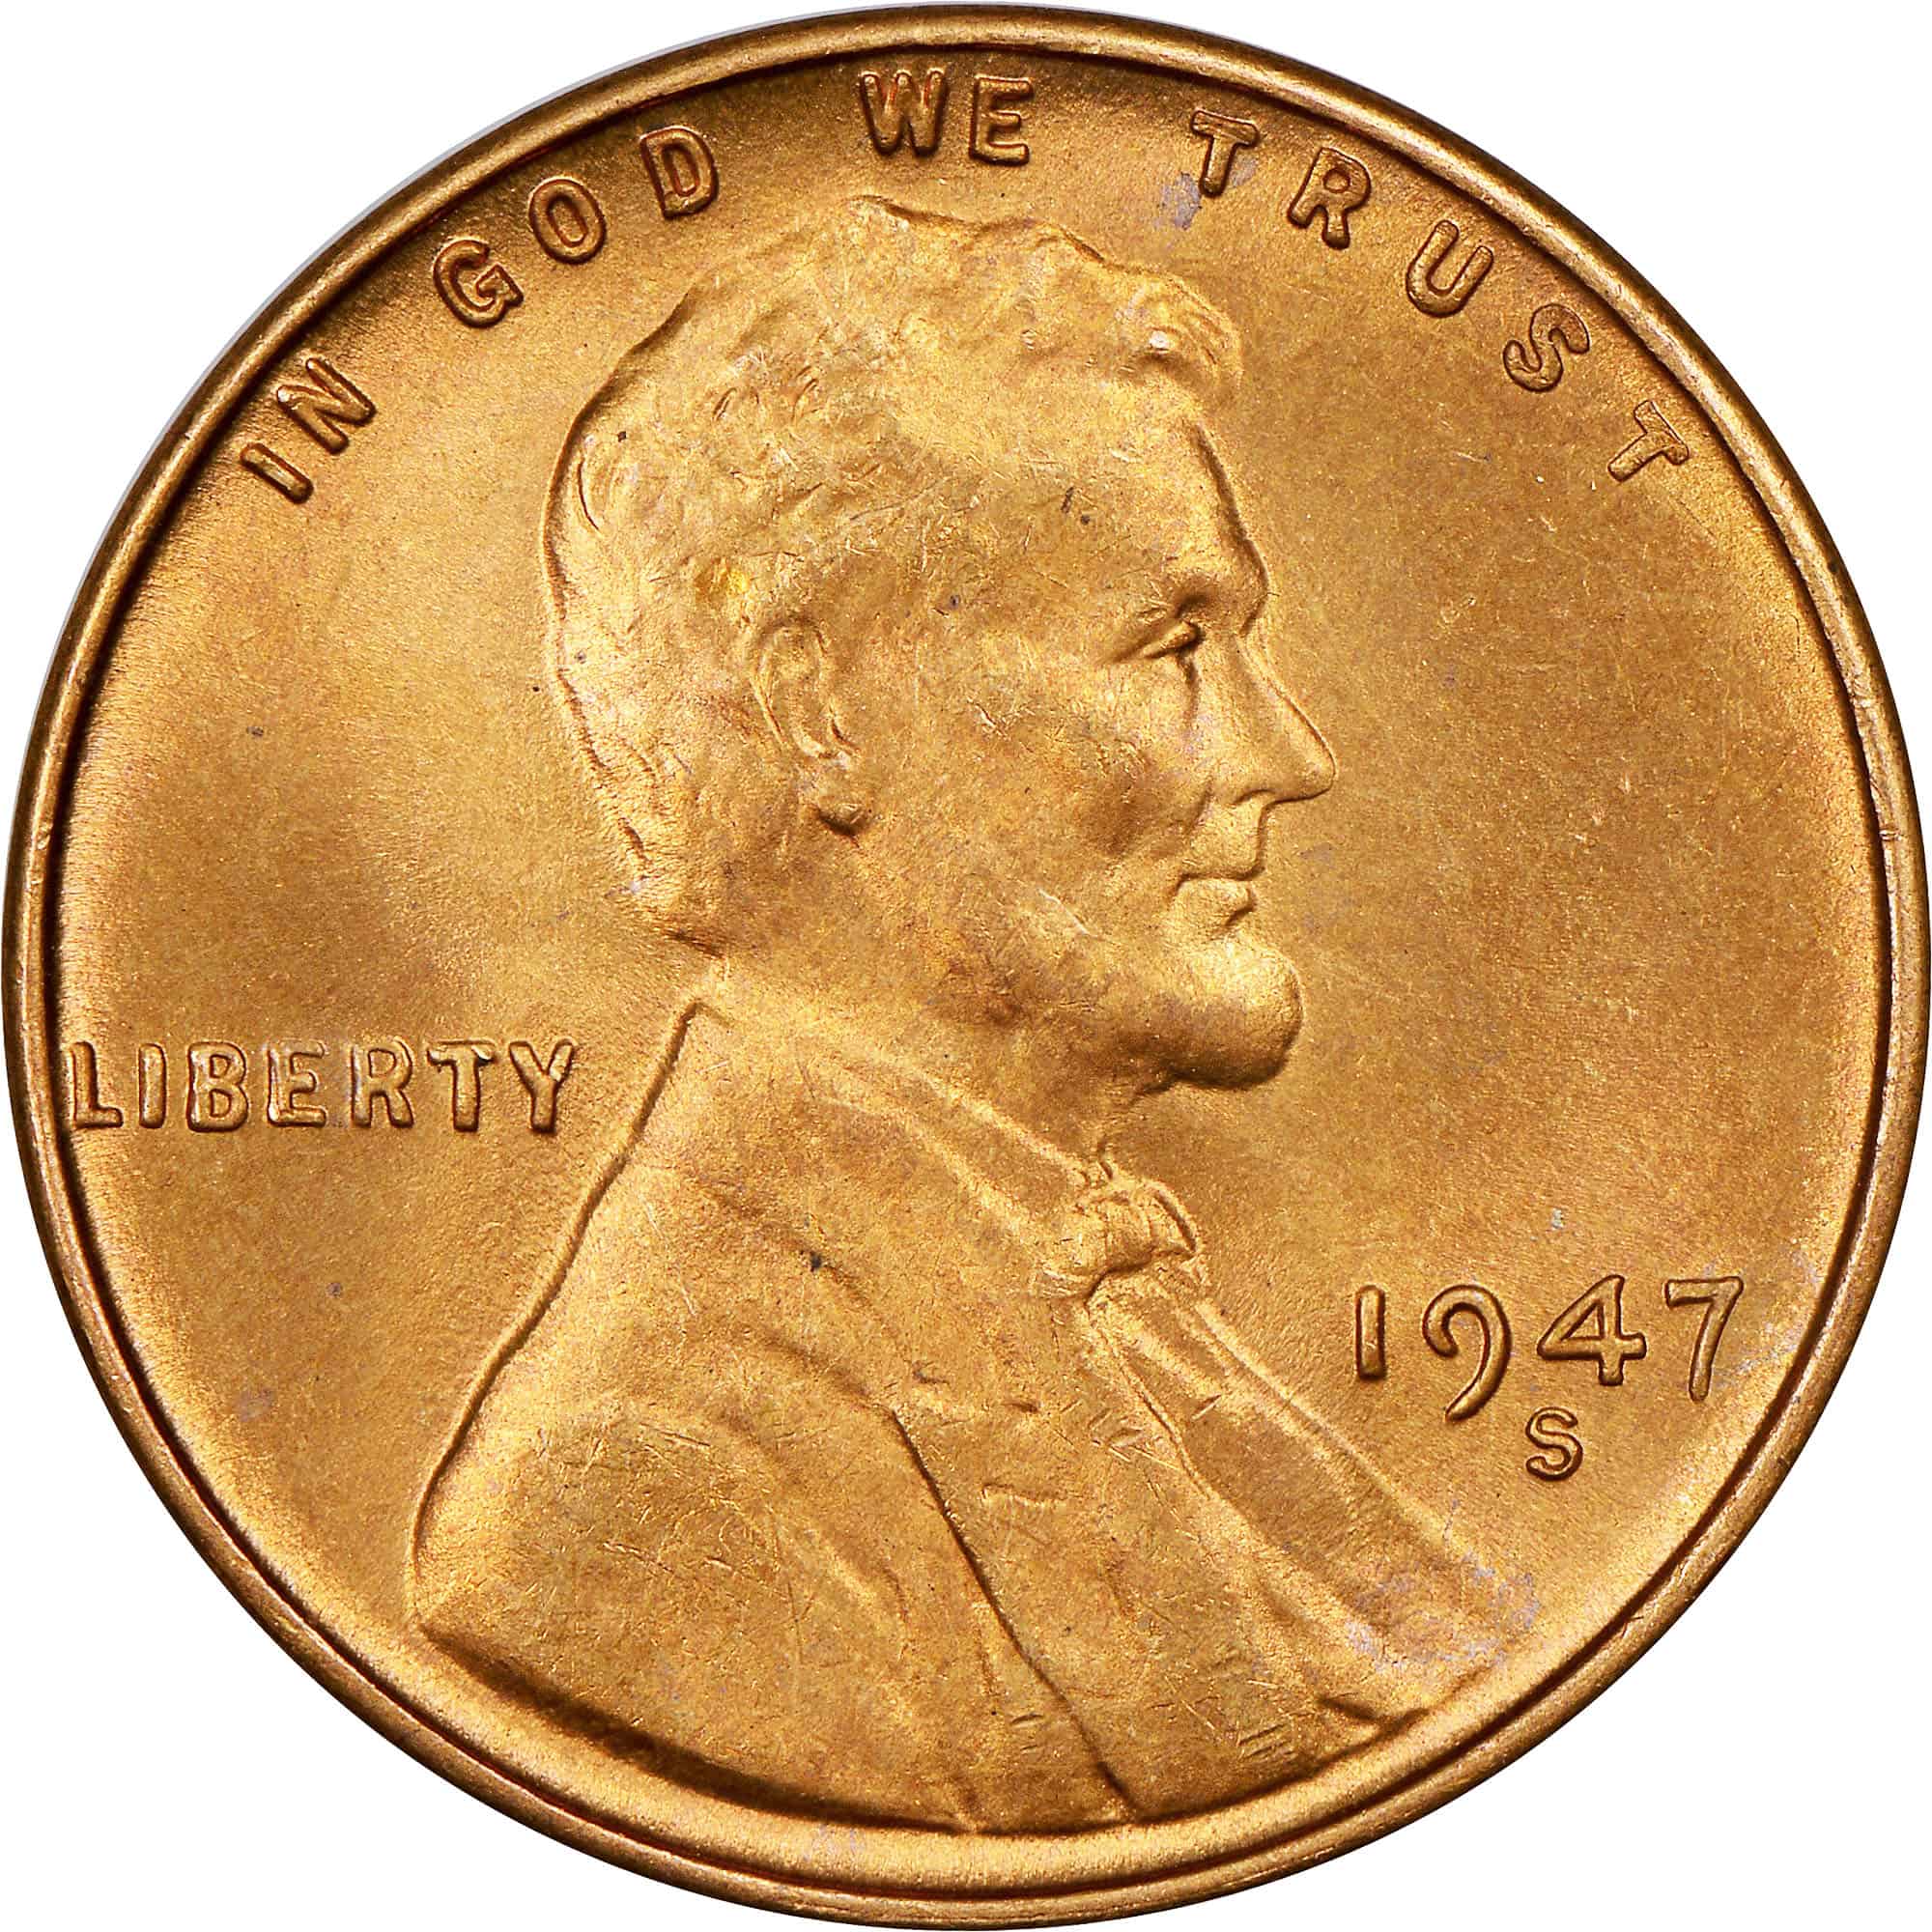 The Obverse of the 1947 Wheat Penny